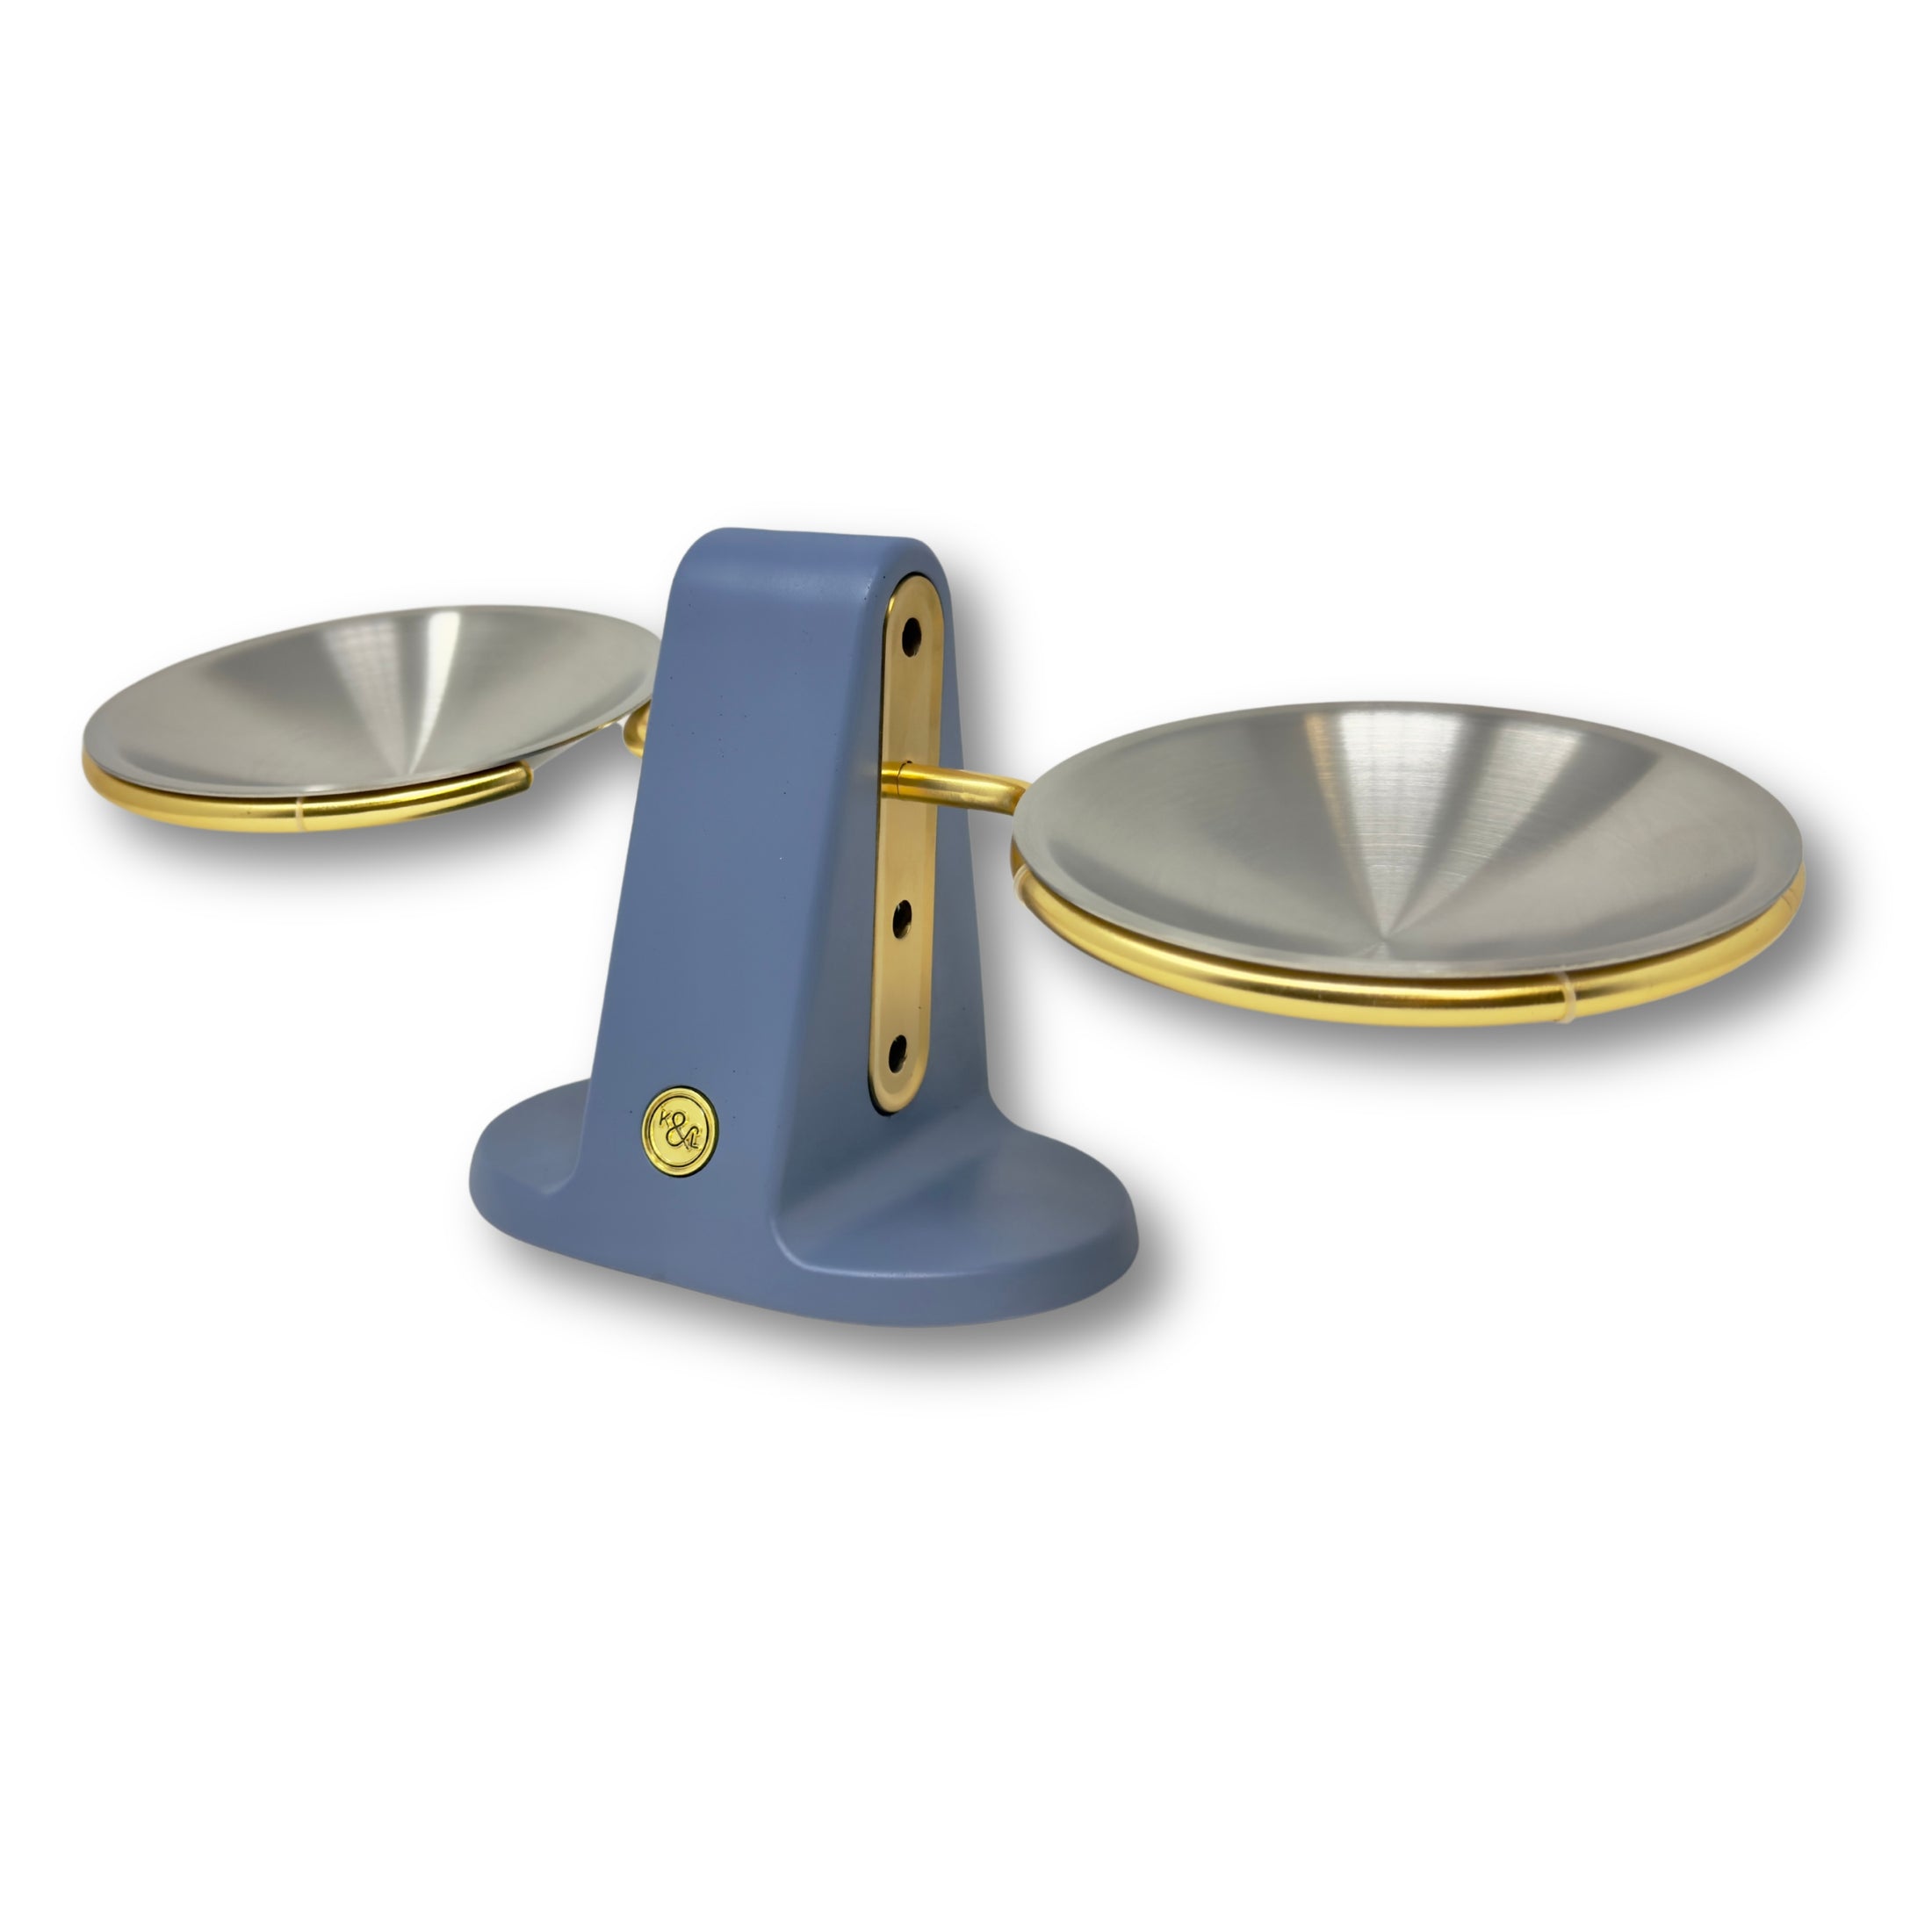 Dine Height Adjustable Cat Food Pigeon Blue and Gold